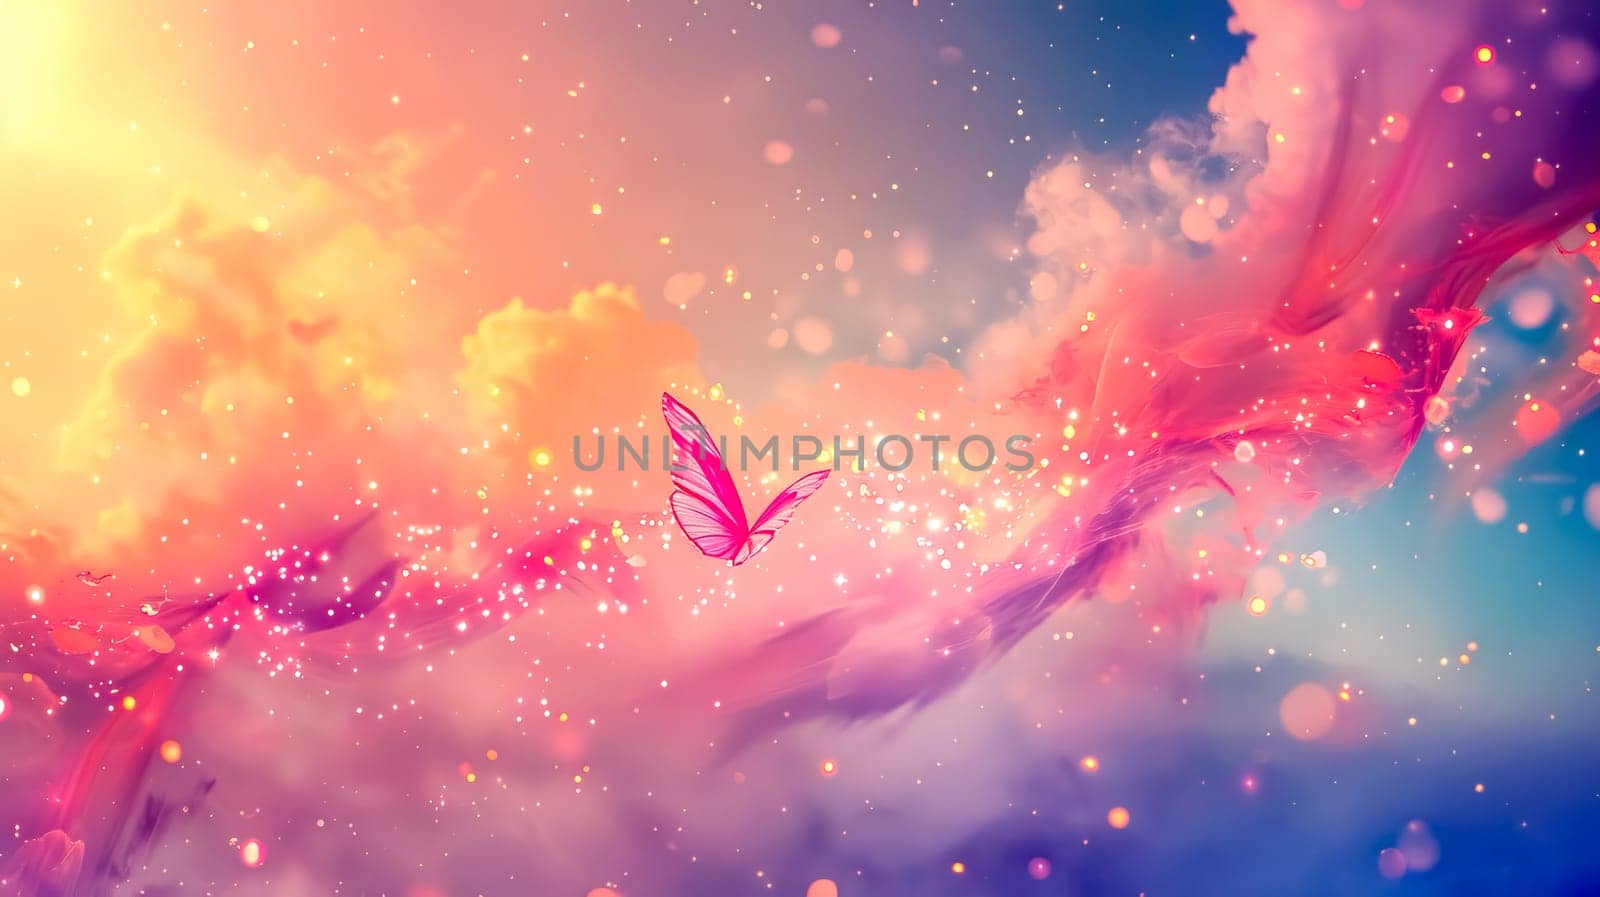 Vibrant butterfly soars amidst sparkling lights and colorful clouds